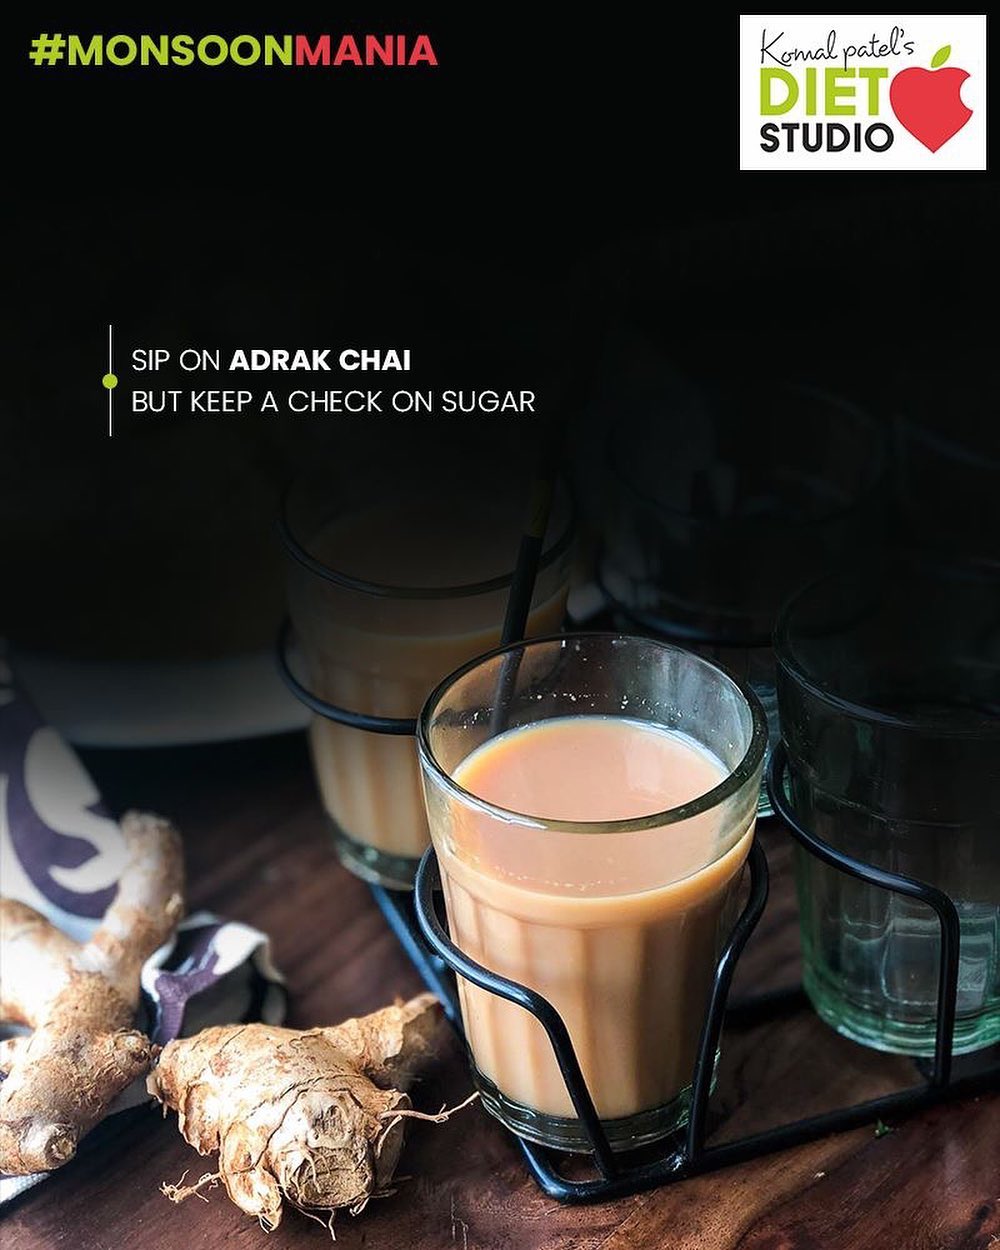 A piping hot cup of adrak wali chai is always a delight in this weather, wouldn't you agree? The concoction can do wonders for your throat and immunity. Made with ginger and other herbs like black pepper, clove and cinnamon, adrak chai is a treasure trove of antioxidants.

#komalpatel #diet #goodfood #goodhealth #eathealthy #goodhealth #MonsoonMania #monsoon